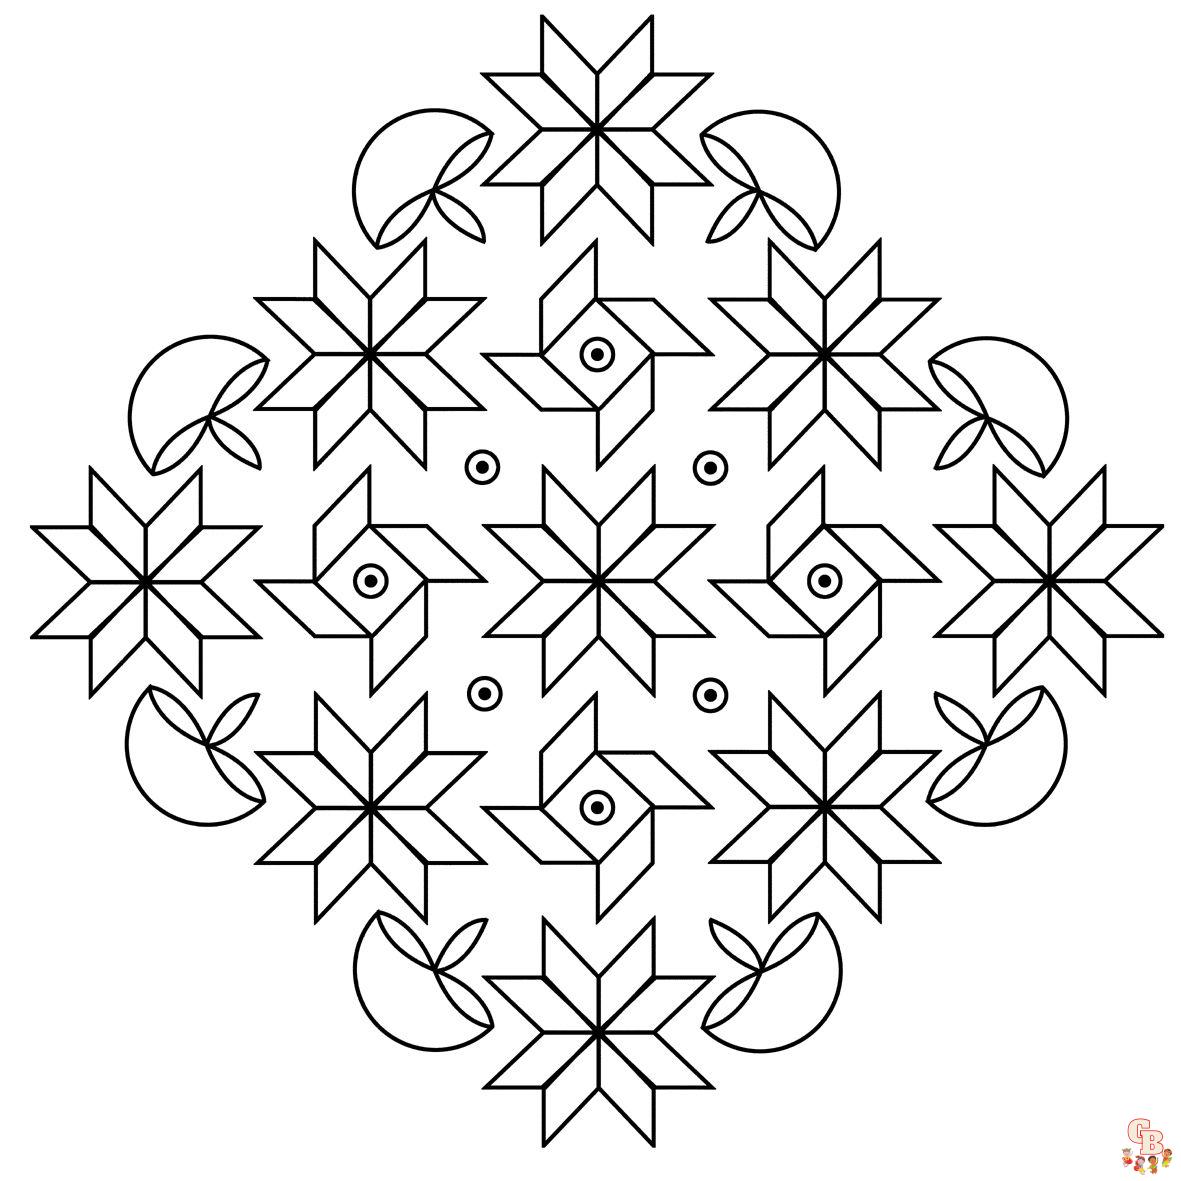 Explore the world of rangoli coloring pages with